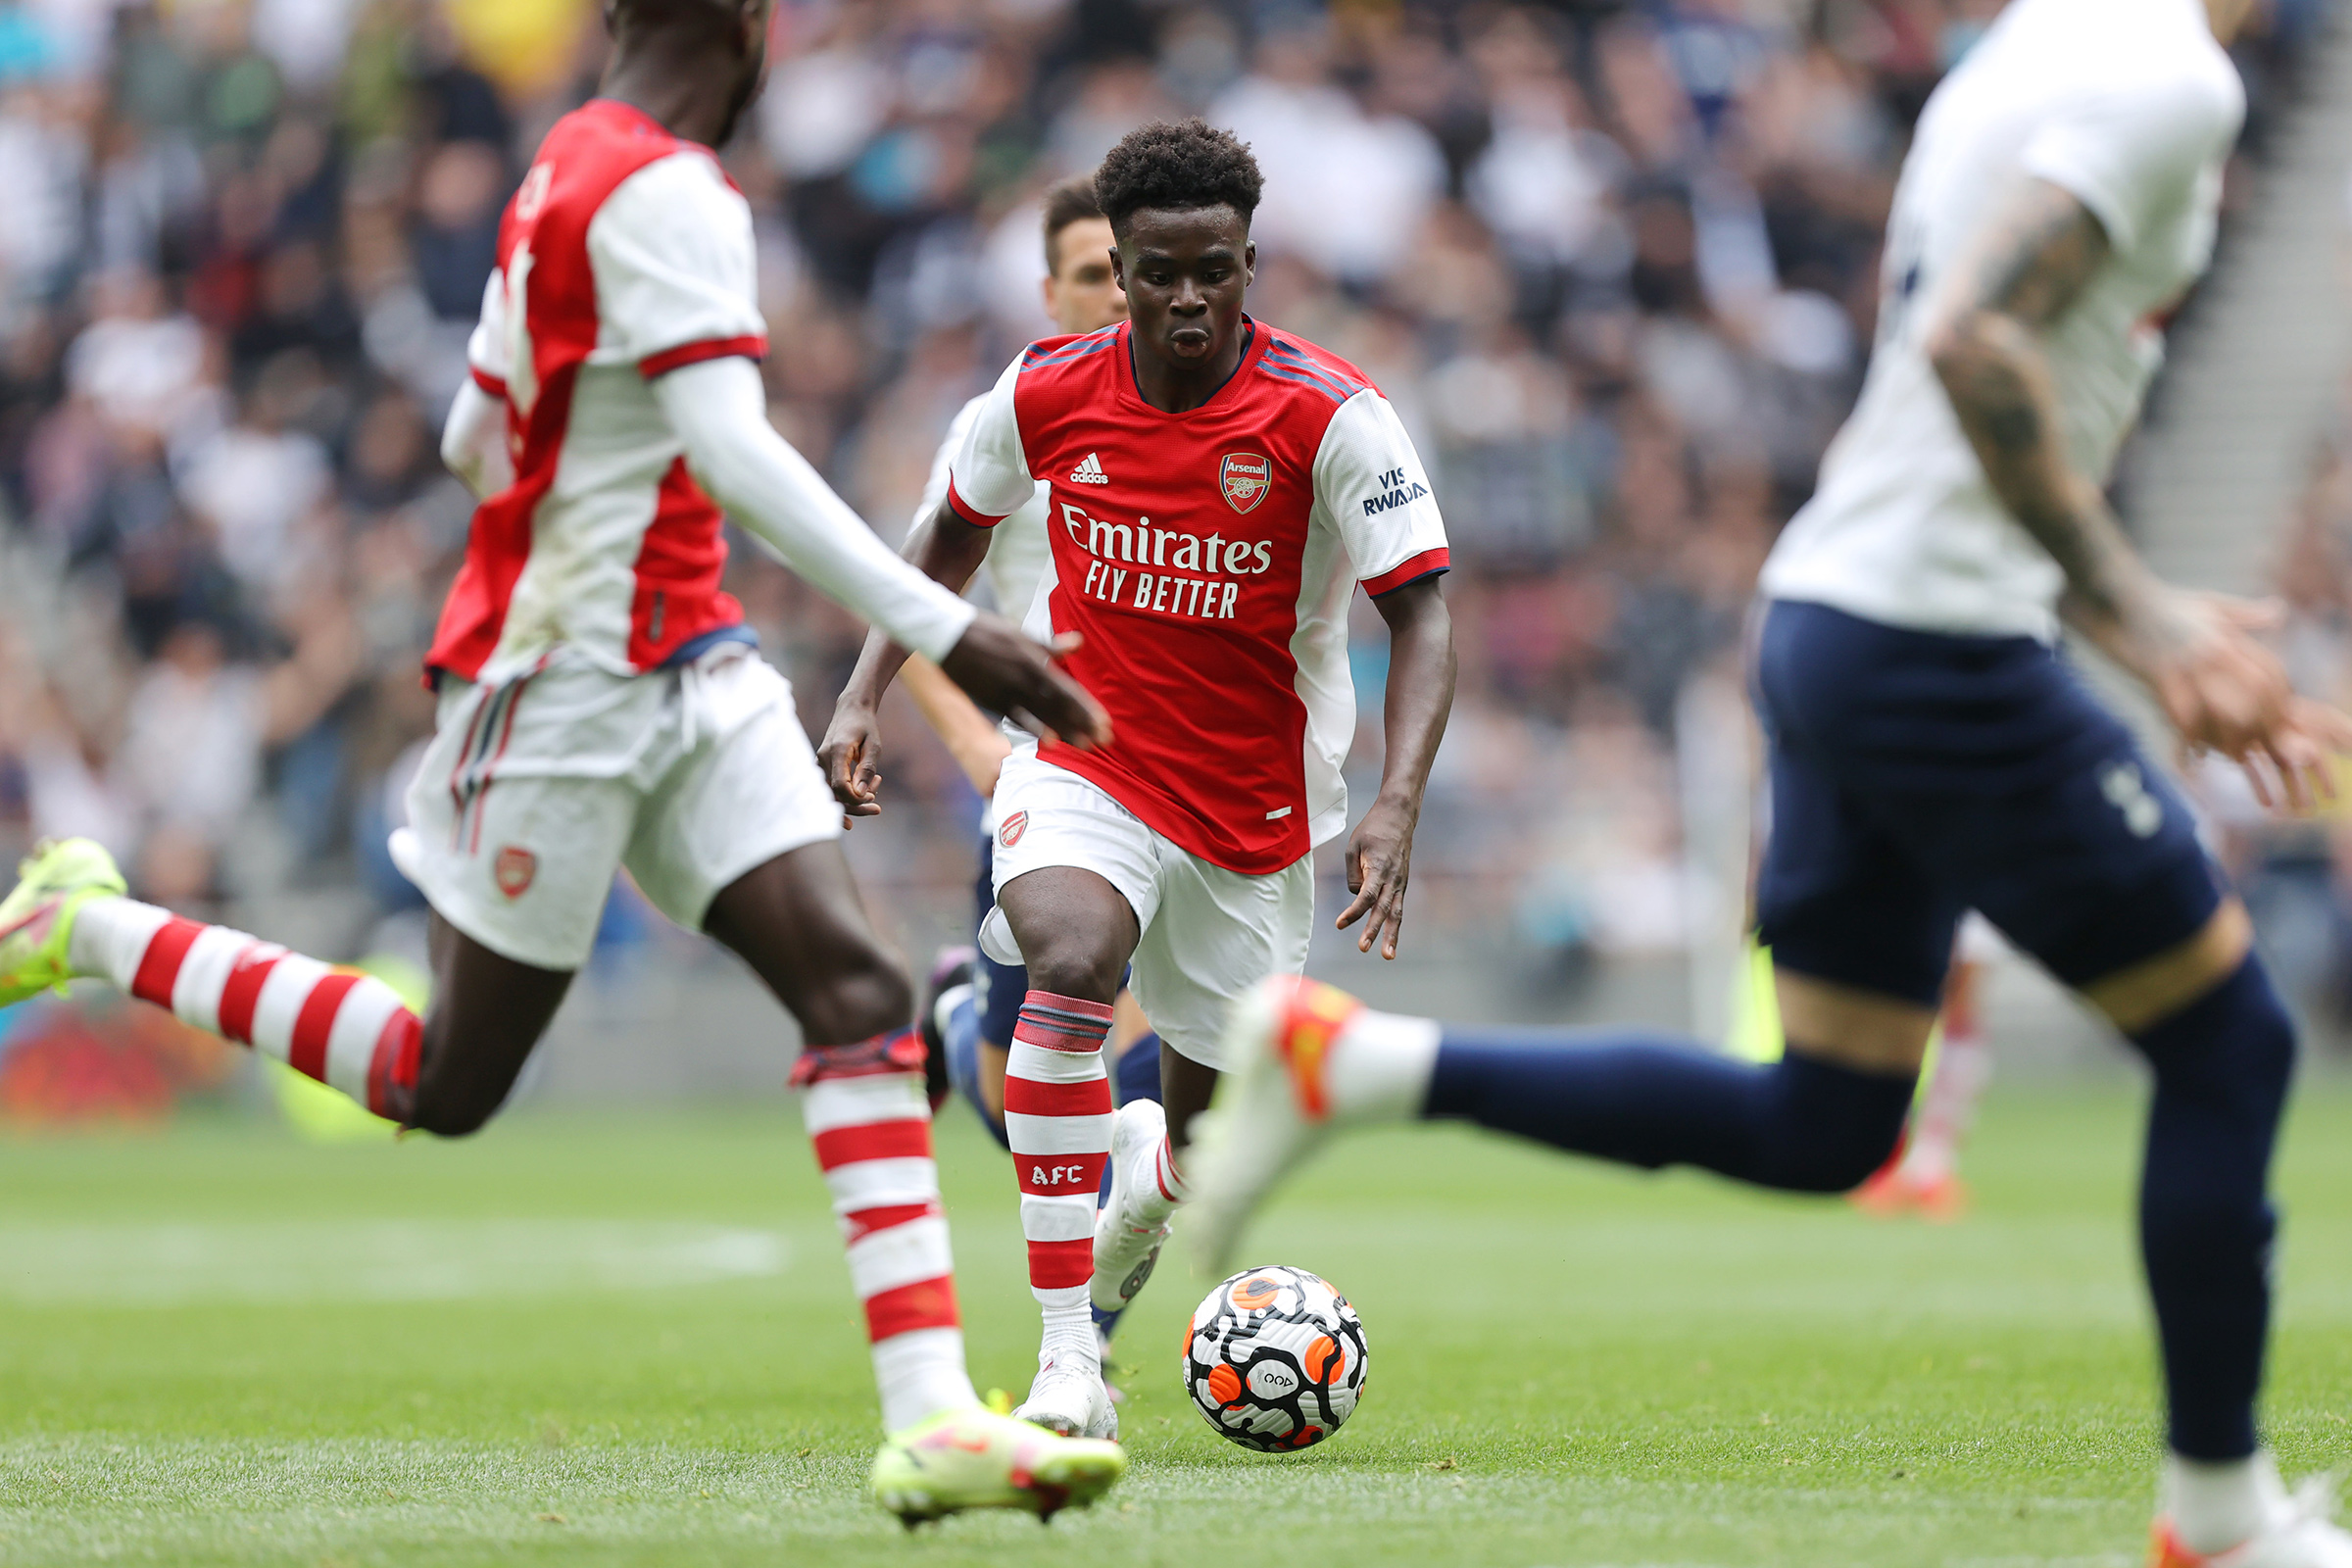 Saka has been Arsenal Player of the Year two years running